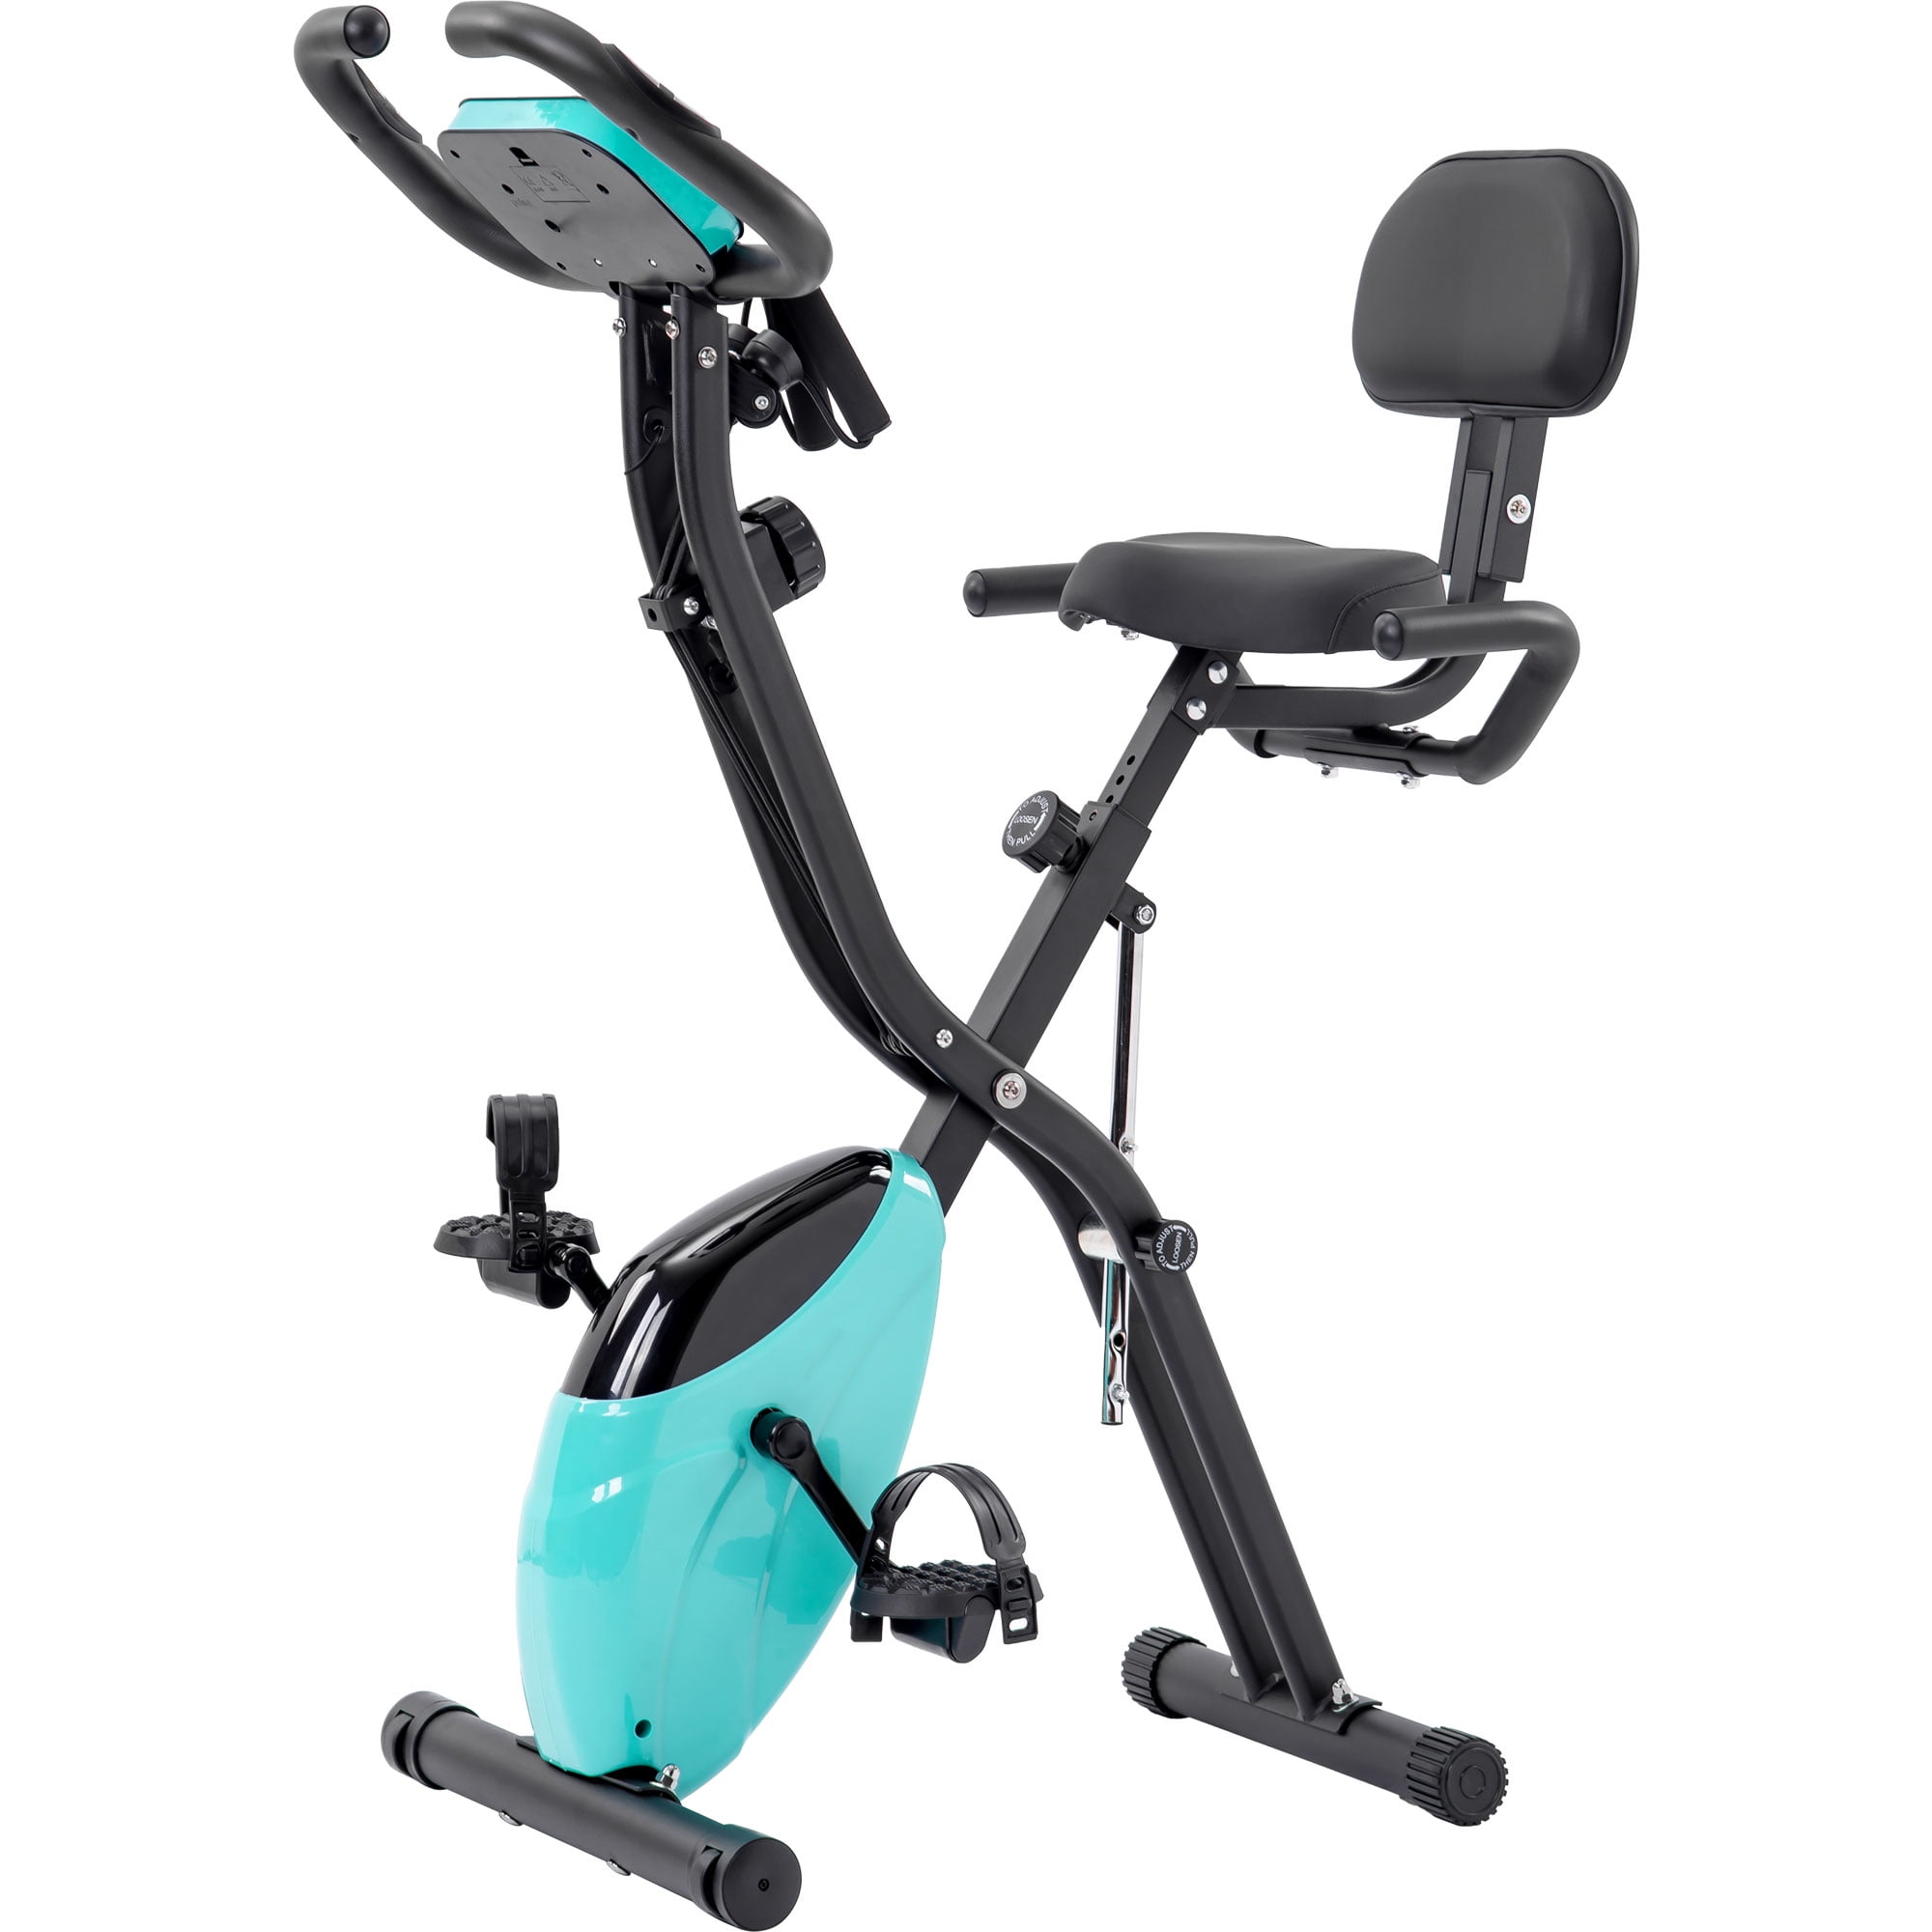 Details about   Folding Exercise Bike Upright Stationary Bike Cycling Ajustable Resistance Home